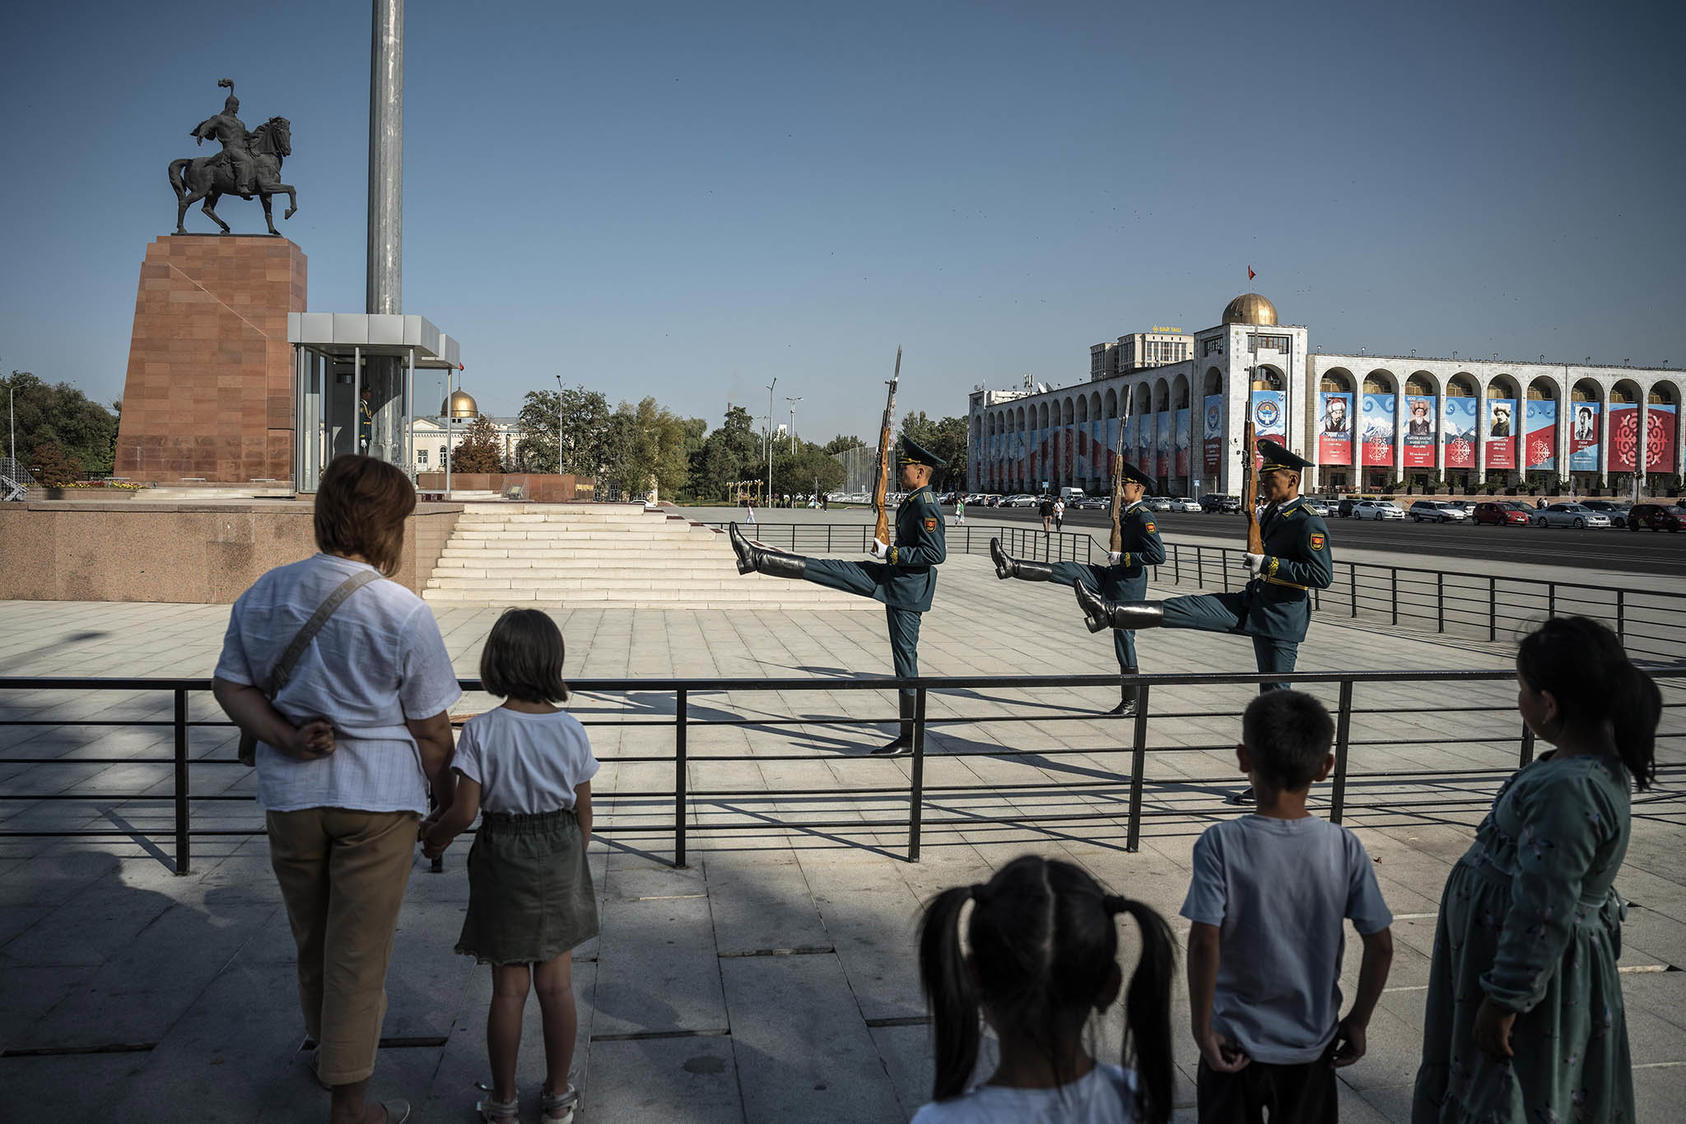 Visitors at Ala Too Square Bishkek, Kyrgyzstan, Sept. 26, 2022. With Russia distracted in Ukraine, Central Asian leaders are looking for a reliable partner to help ensure domestic stability. (Sergey Ponomarev/The New York Times